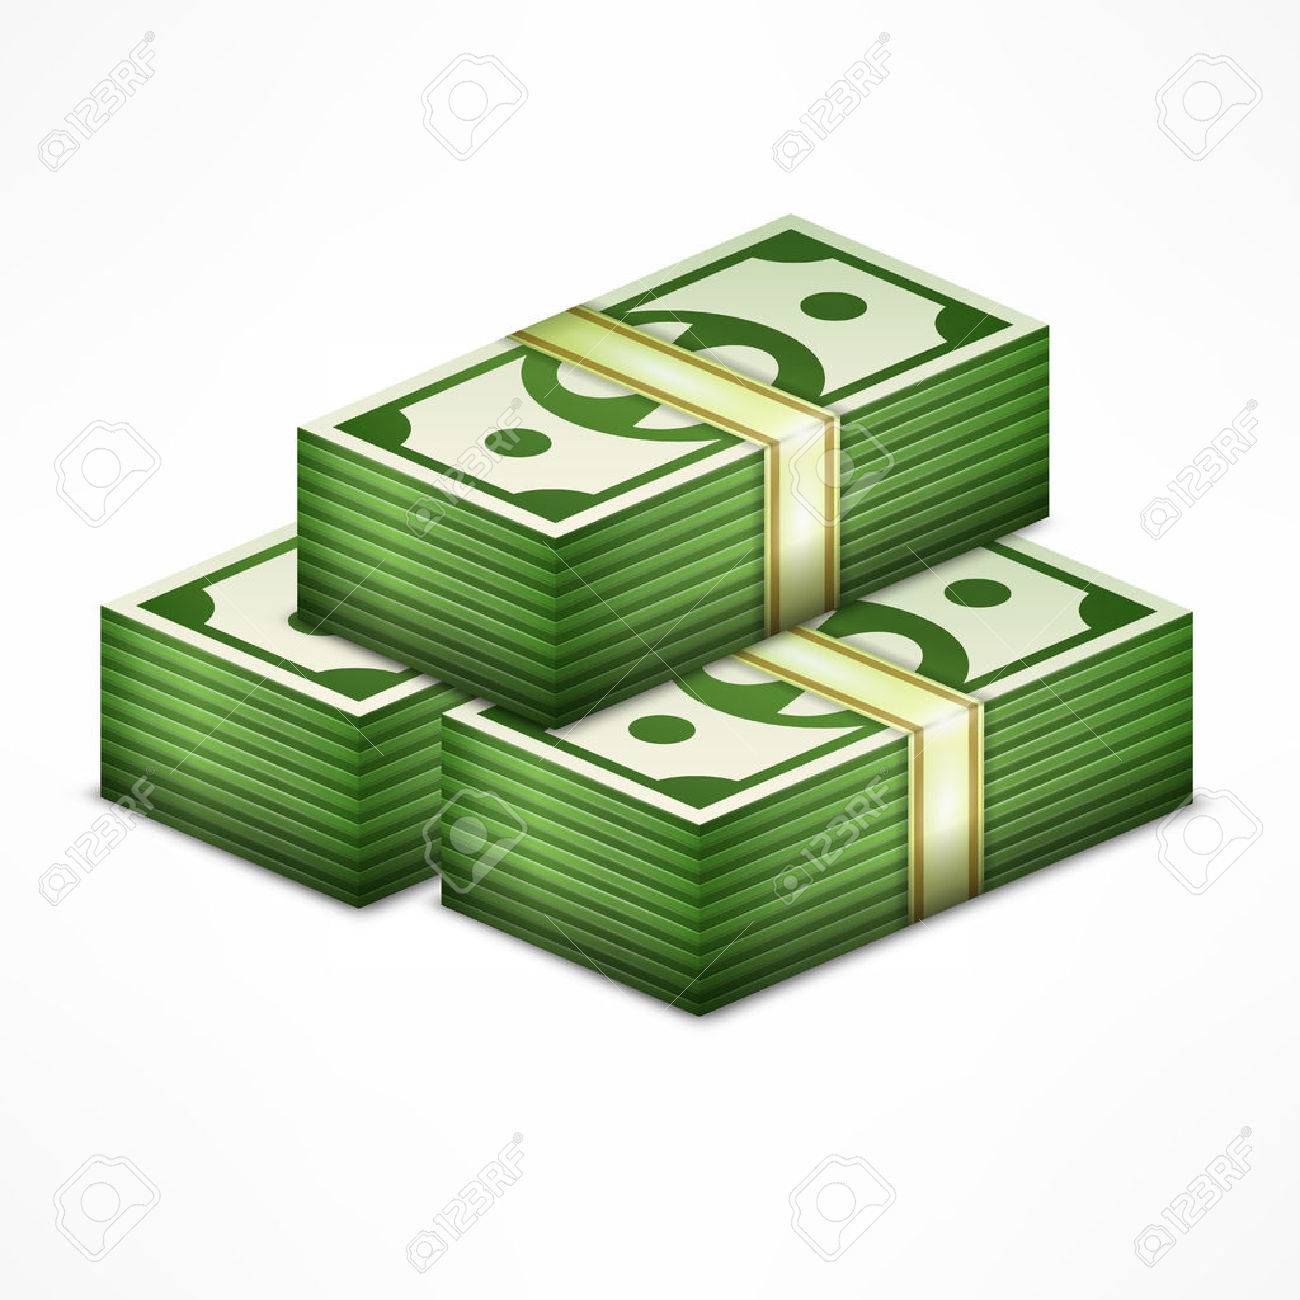 Clipart money stack.